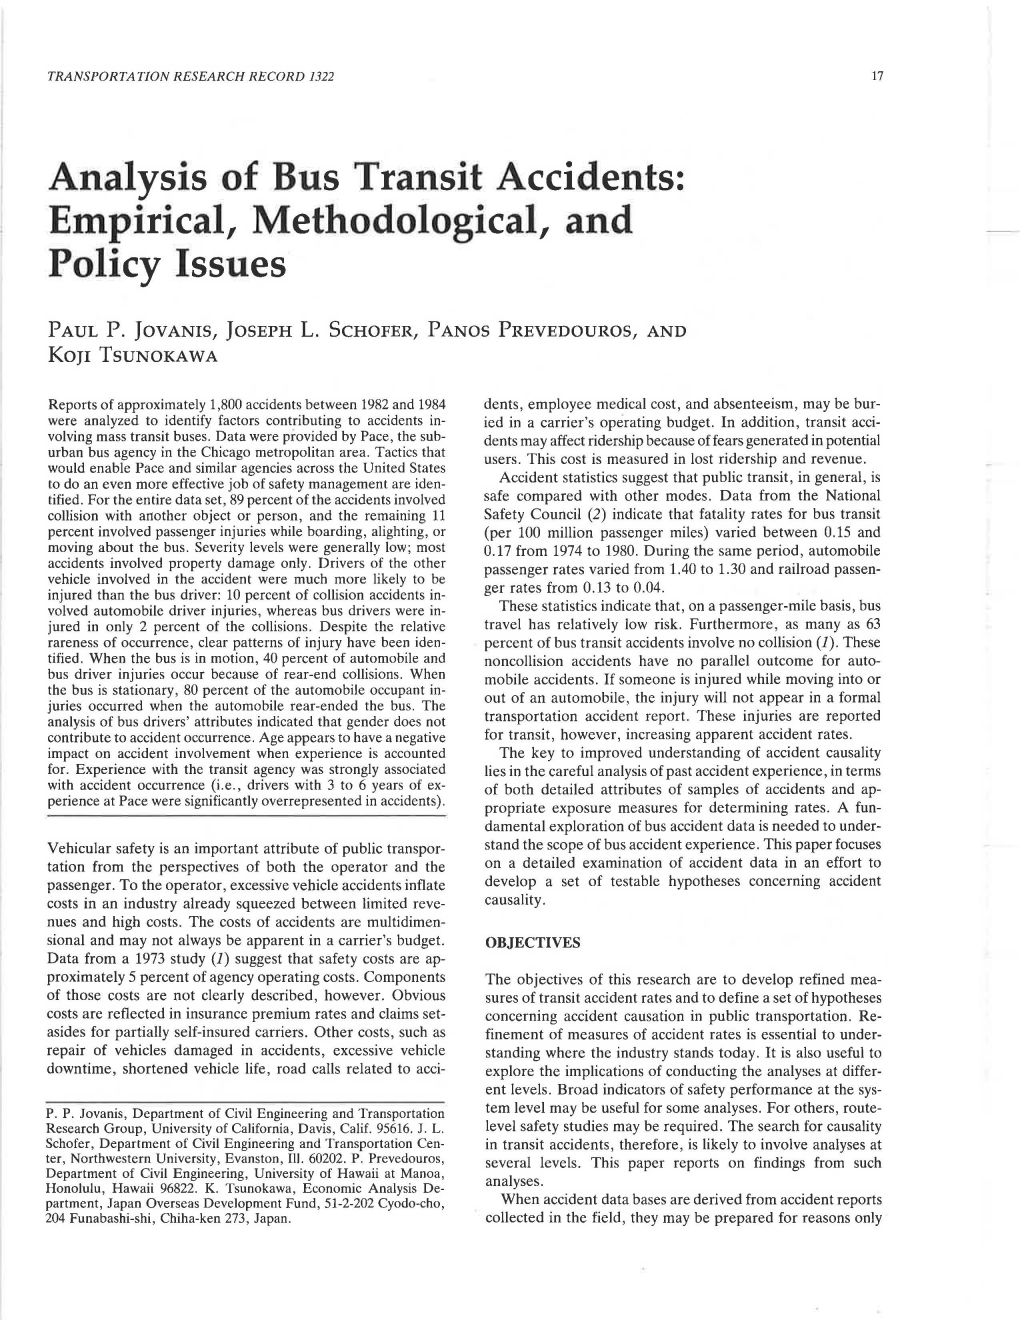 Analysis of Bus Transit Accidents: Empirical, Methodological, and Policy Issues